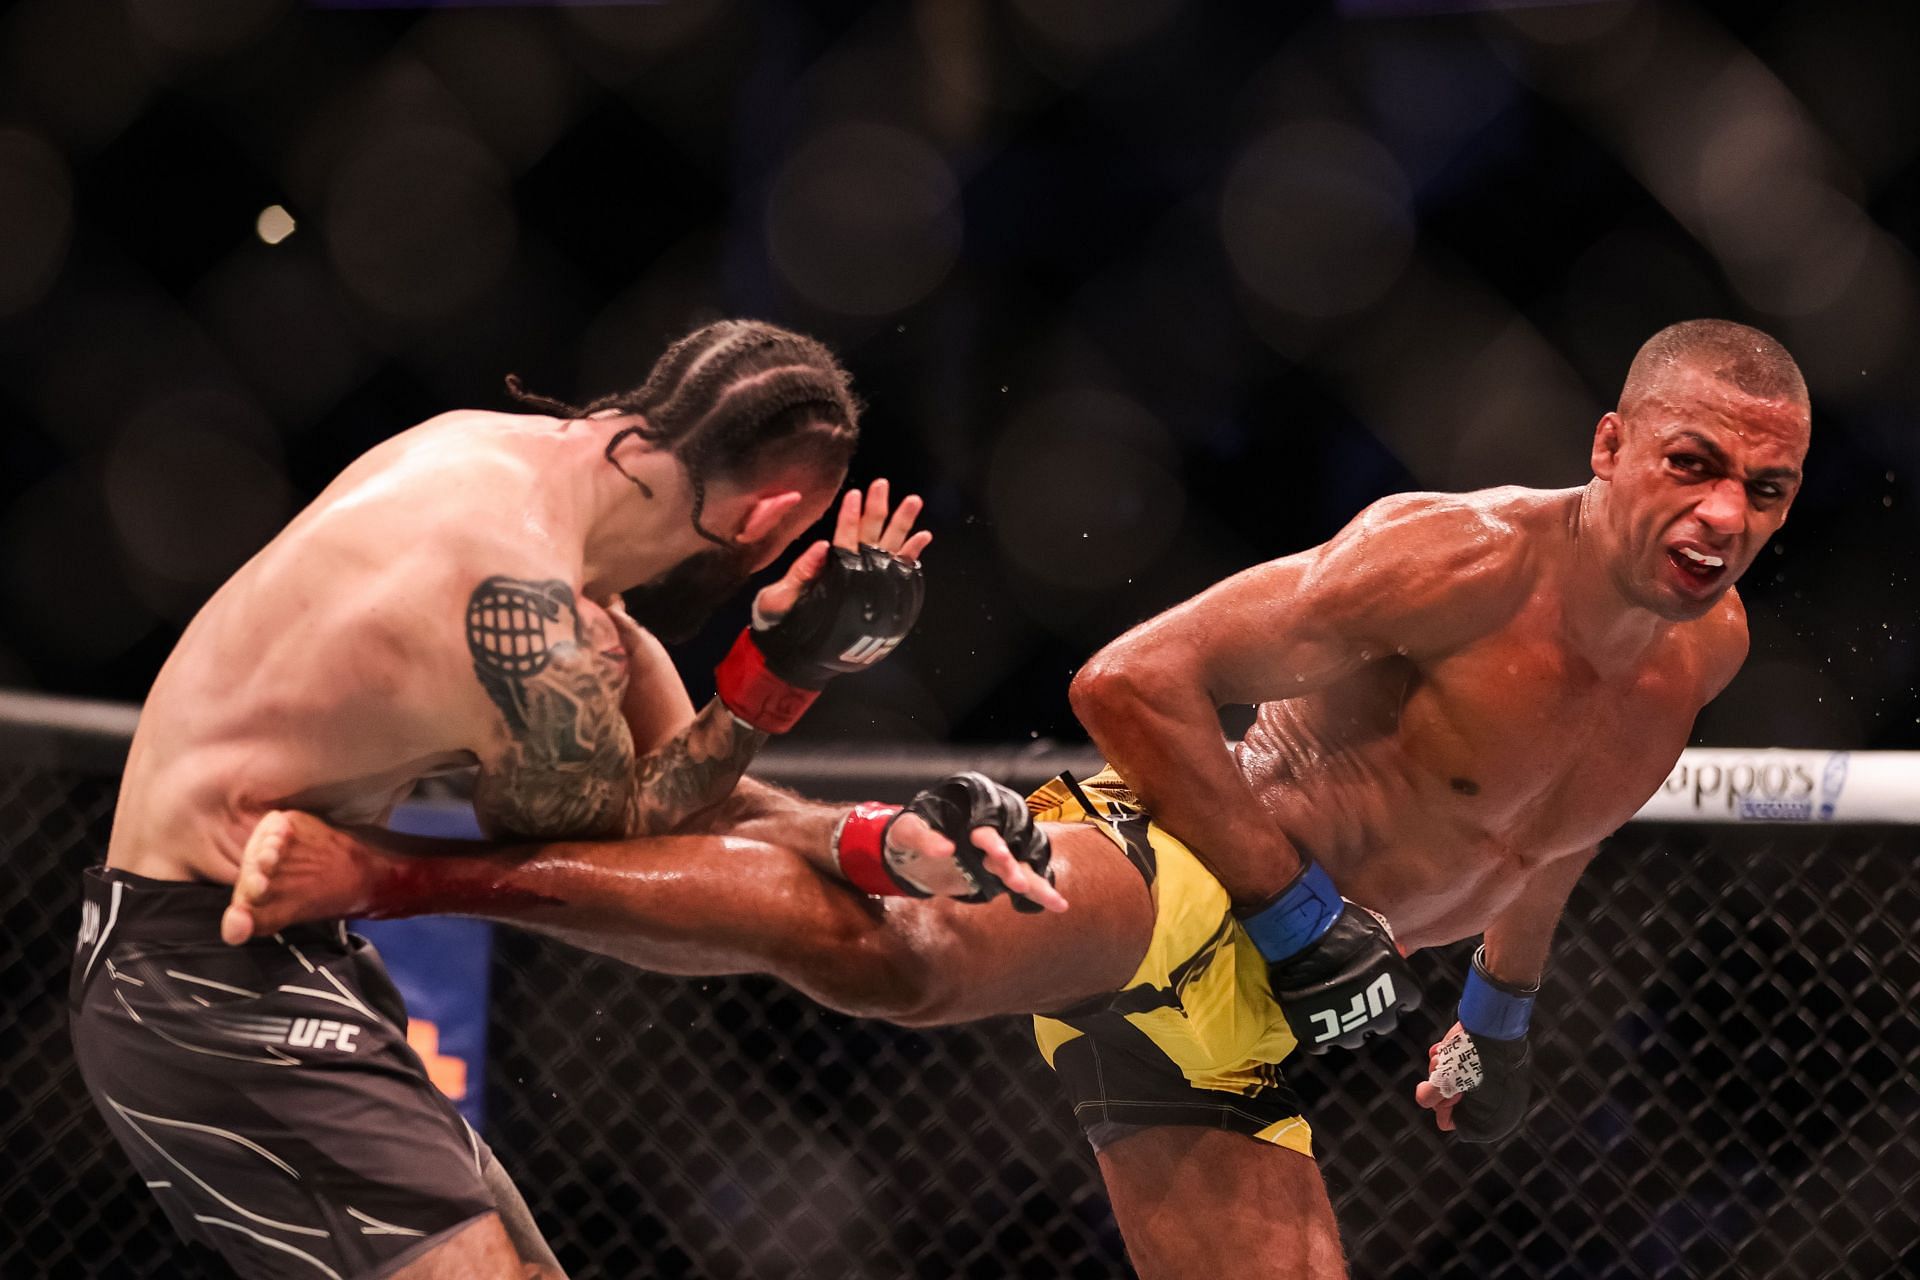 Edson Barboza showed that spinning kicks could be effective when he fought Terry Etim in 2012